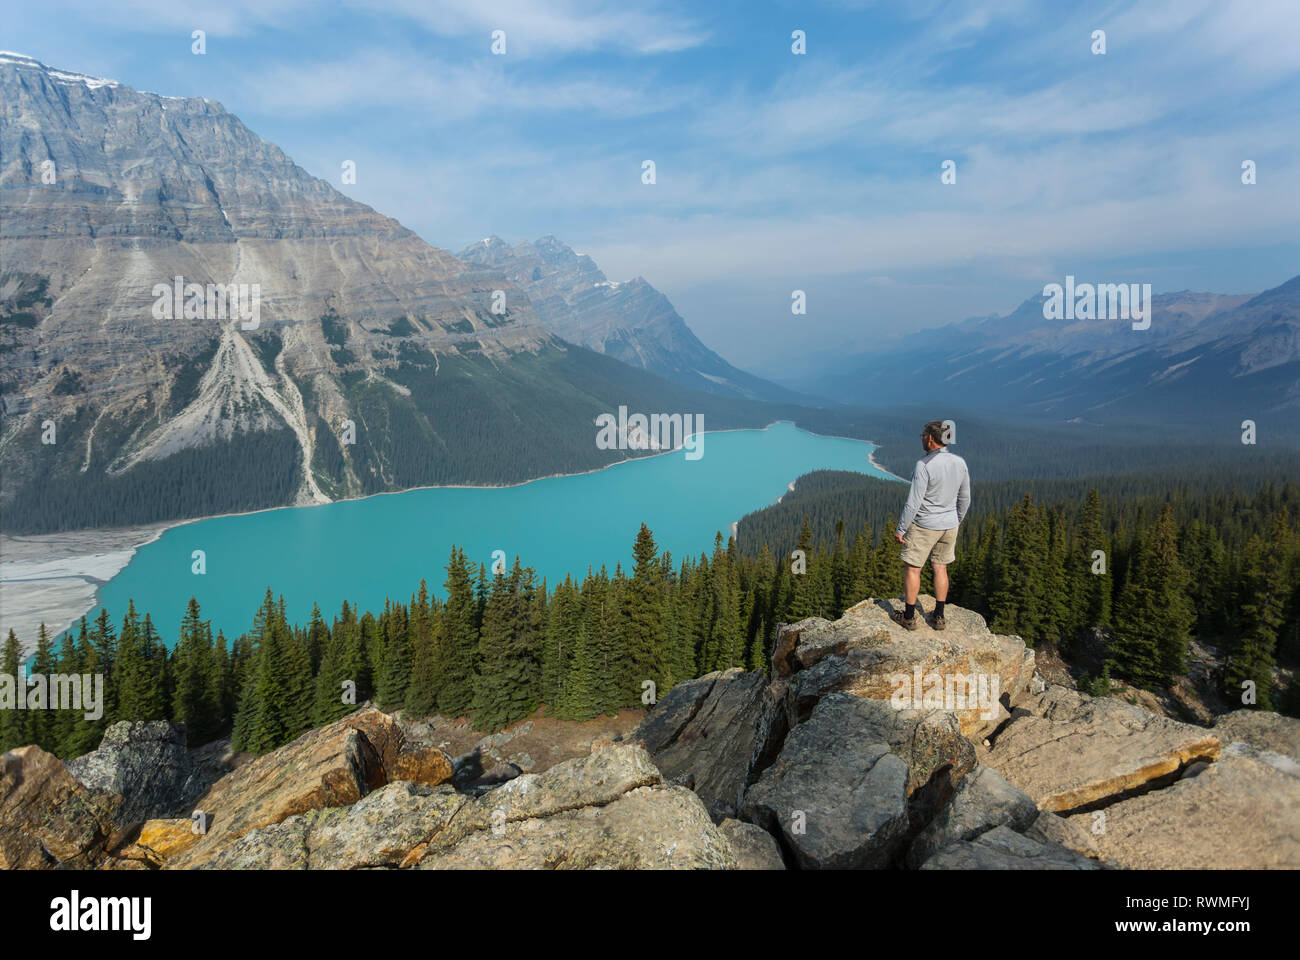 A man stands on a rock ridge overlooking the stunning turquoise water of Peyto Lake in Banff National Park; Alberta, Canada Stock Photo